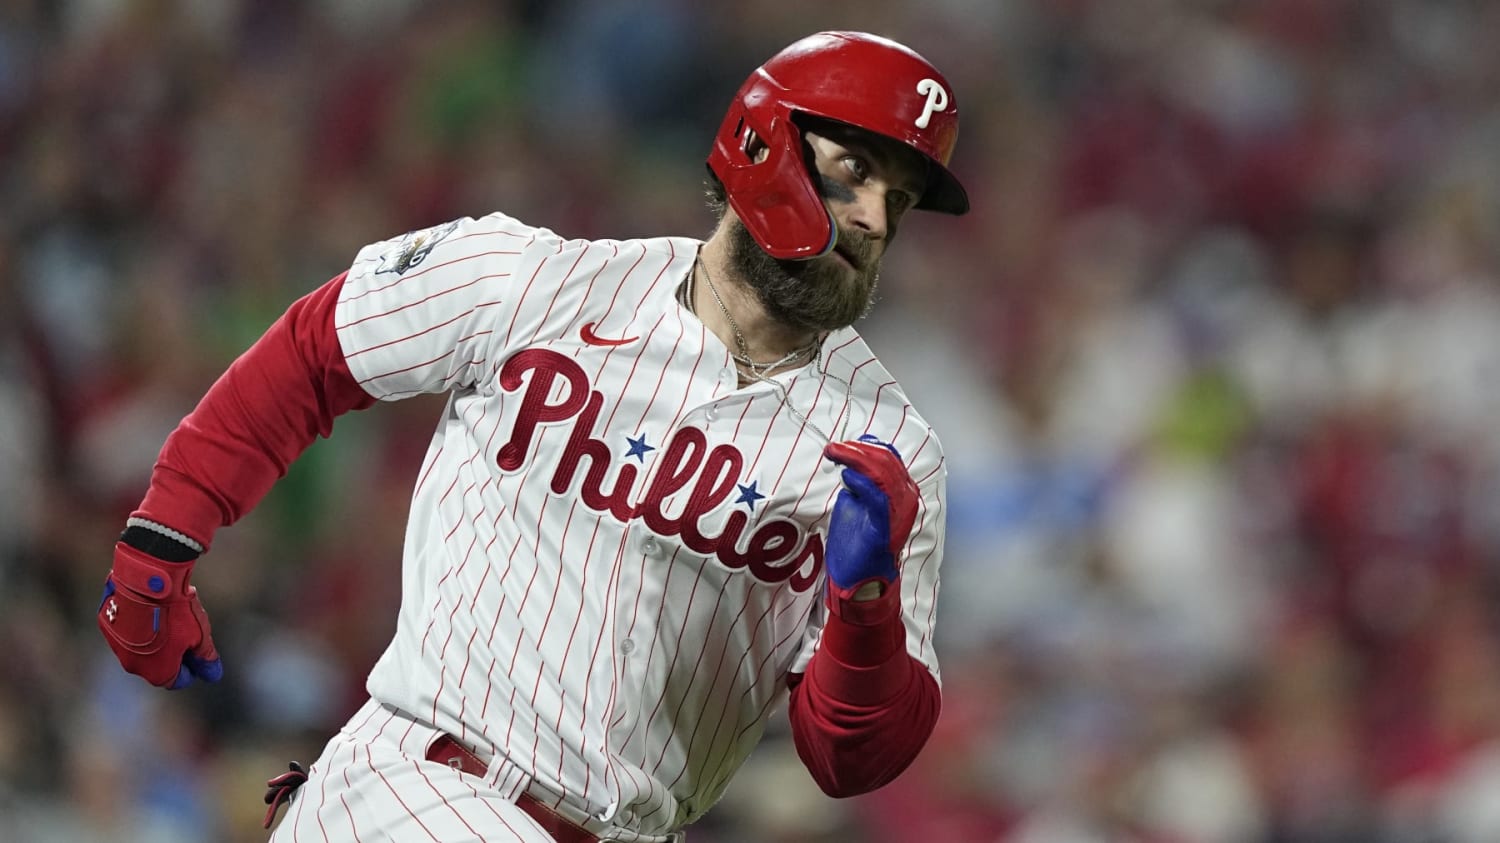 Alex Pavlovic on X: The Phillies paused for a moment to